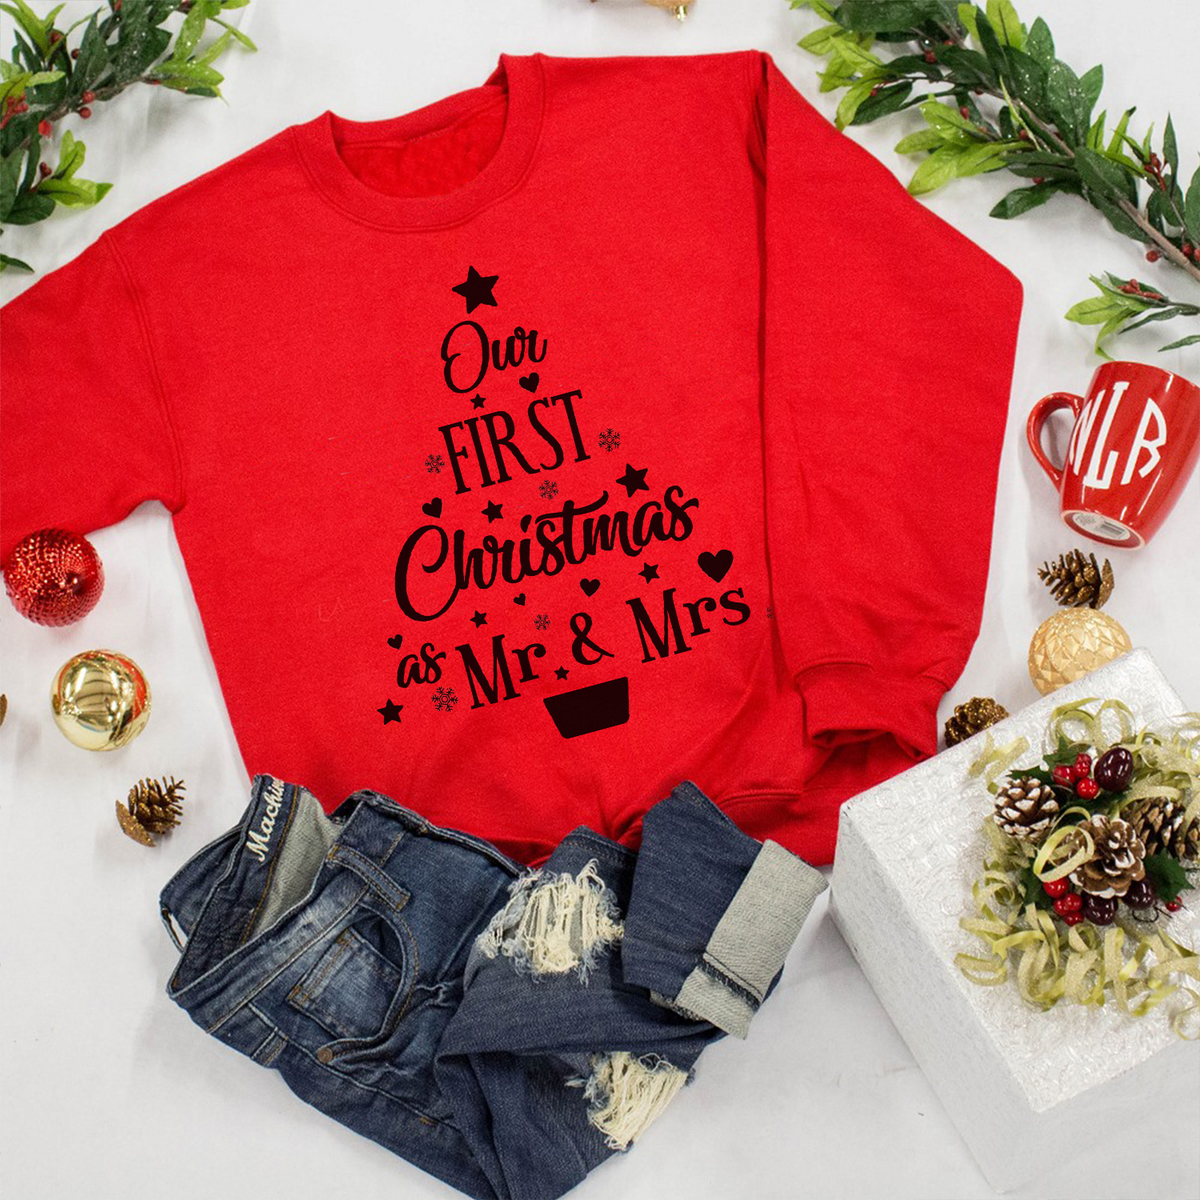 Our First Christmas as Mr &amp; Mrs red Sweatshirt -Husband and Wife